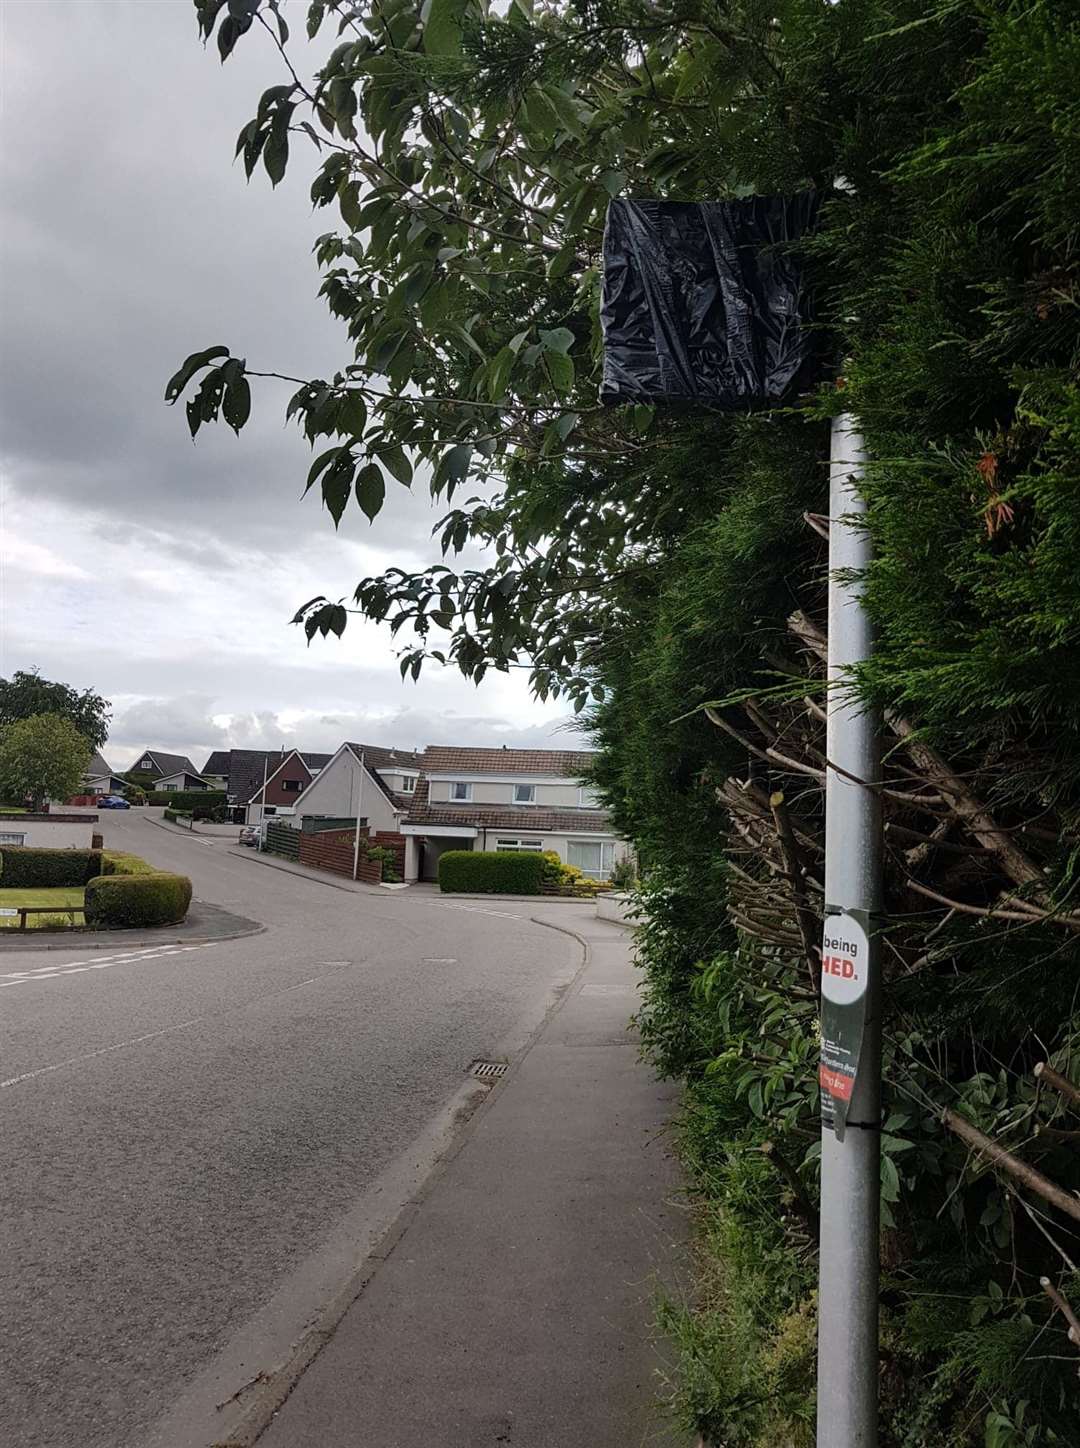 Bus stop signs throughout Forbeshill have been taped up since the service was removed.